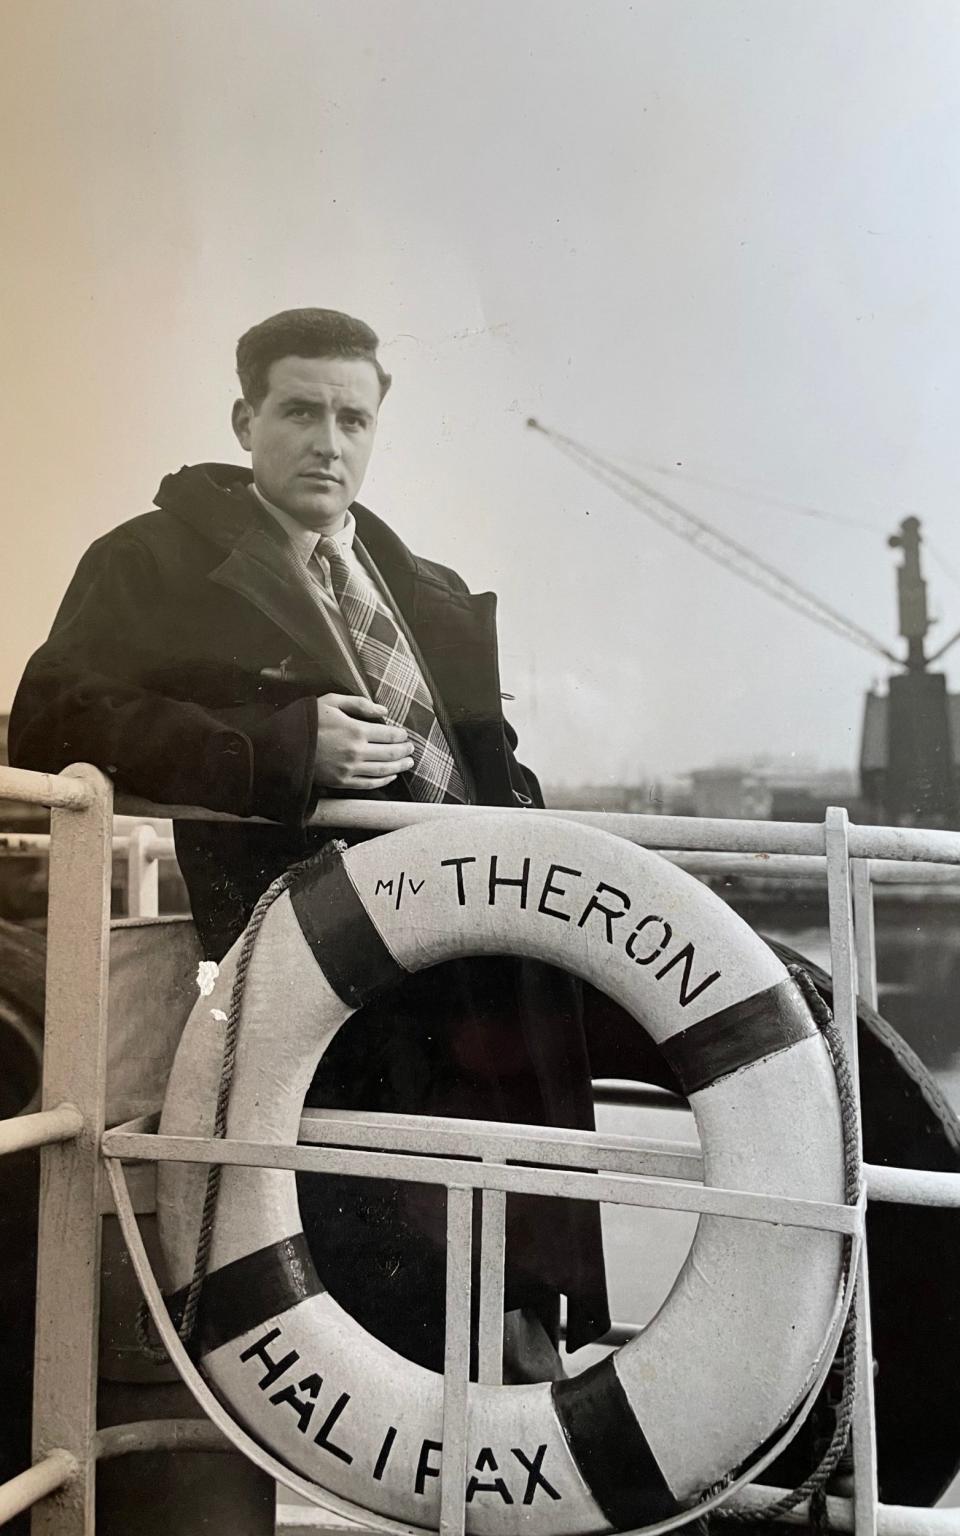 Williams on MV Theron before departing for the Antarctic